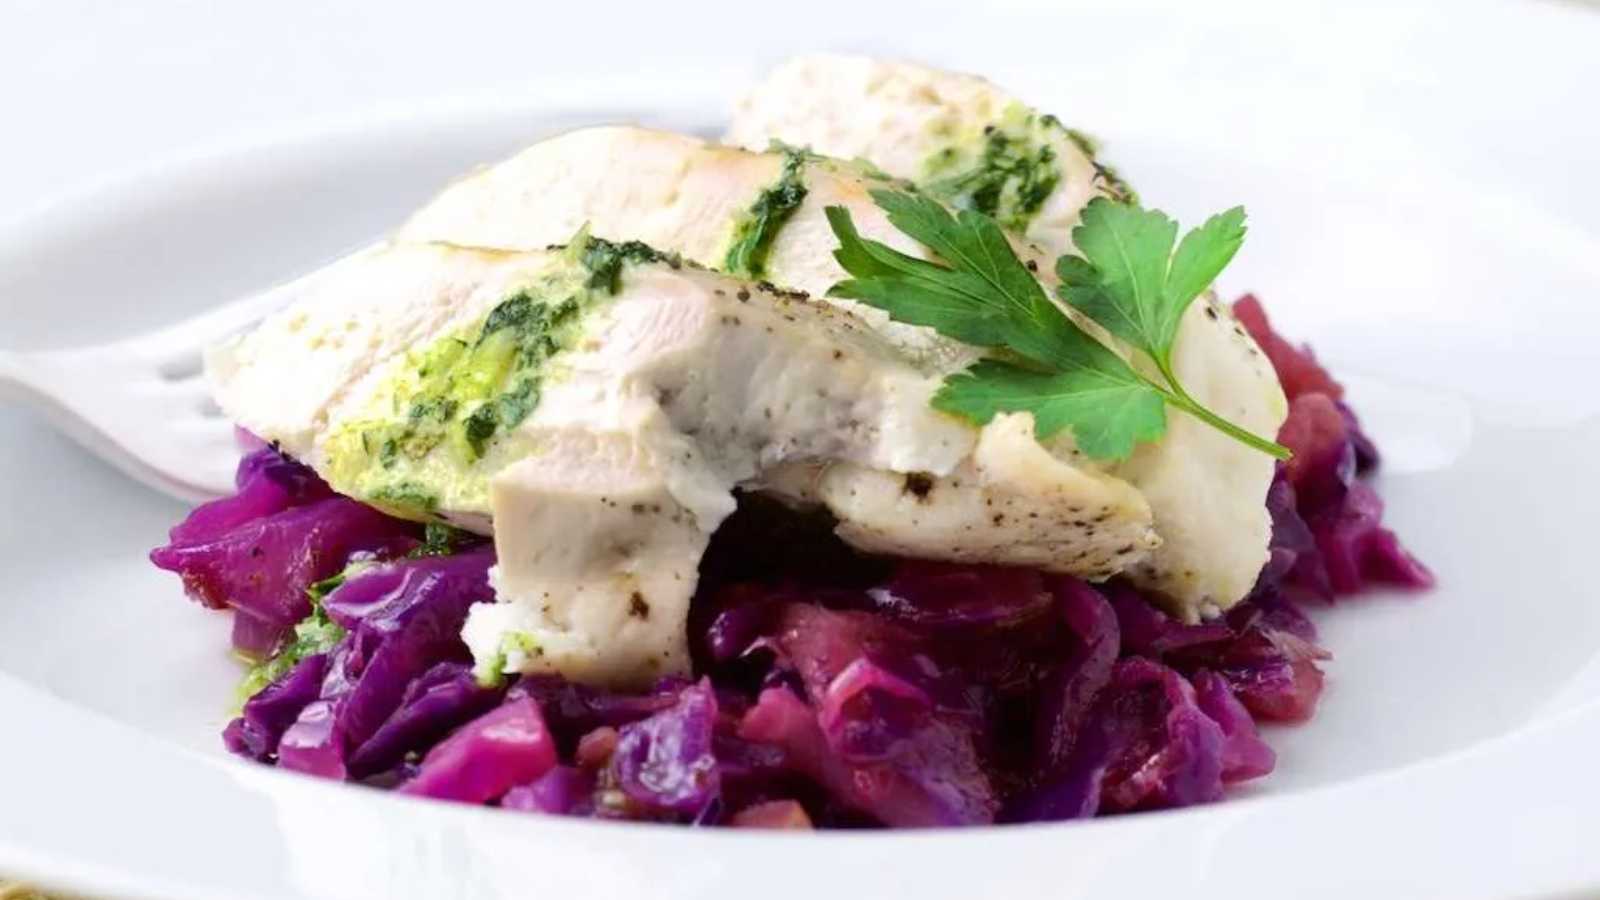 Braised red cabbage on a white plate topped with chicken breats.